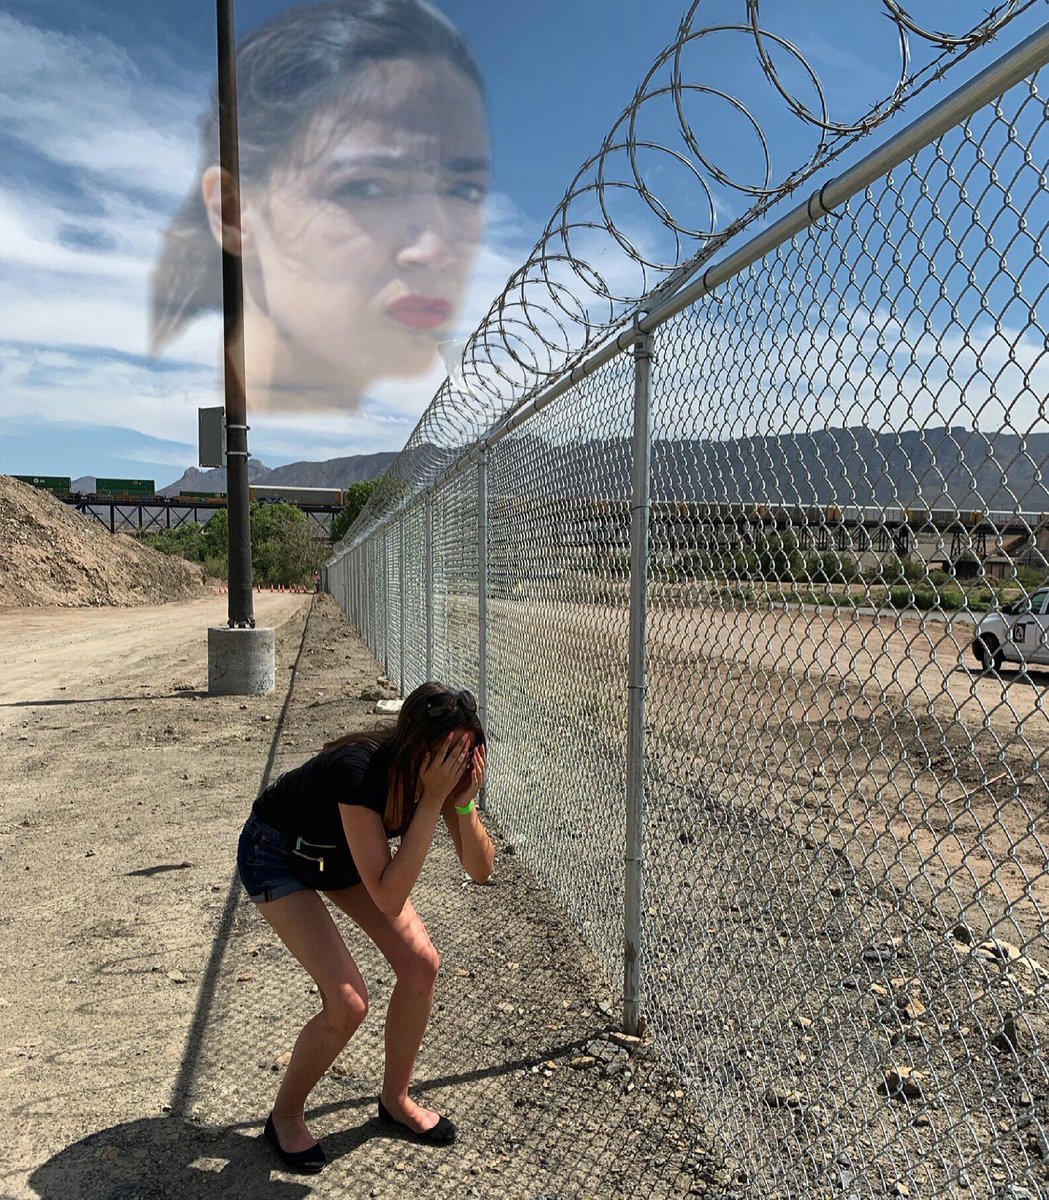 RT @stclairashley: AOC wasn’t available for a photo op at the border this time so I guess I’ll have to fill in https://t.co/hH8NTdGDHB